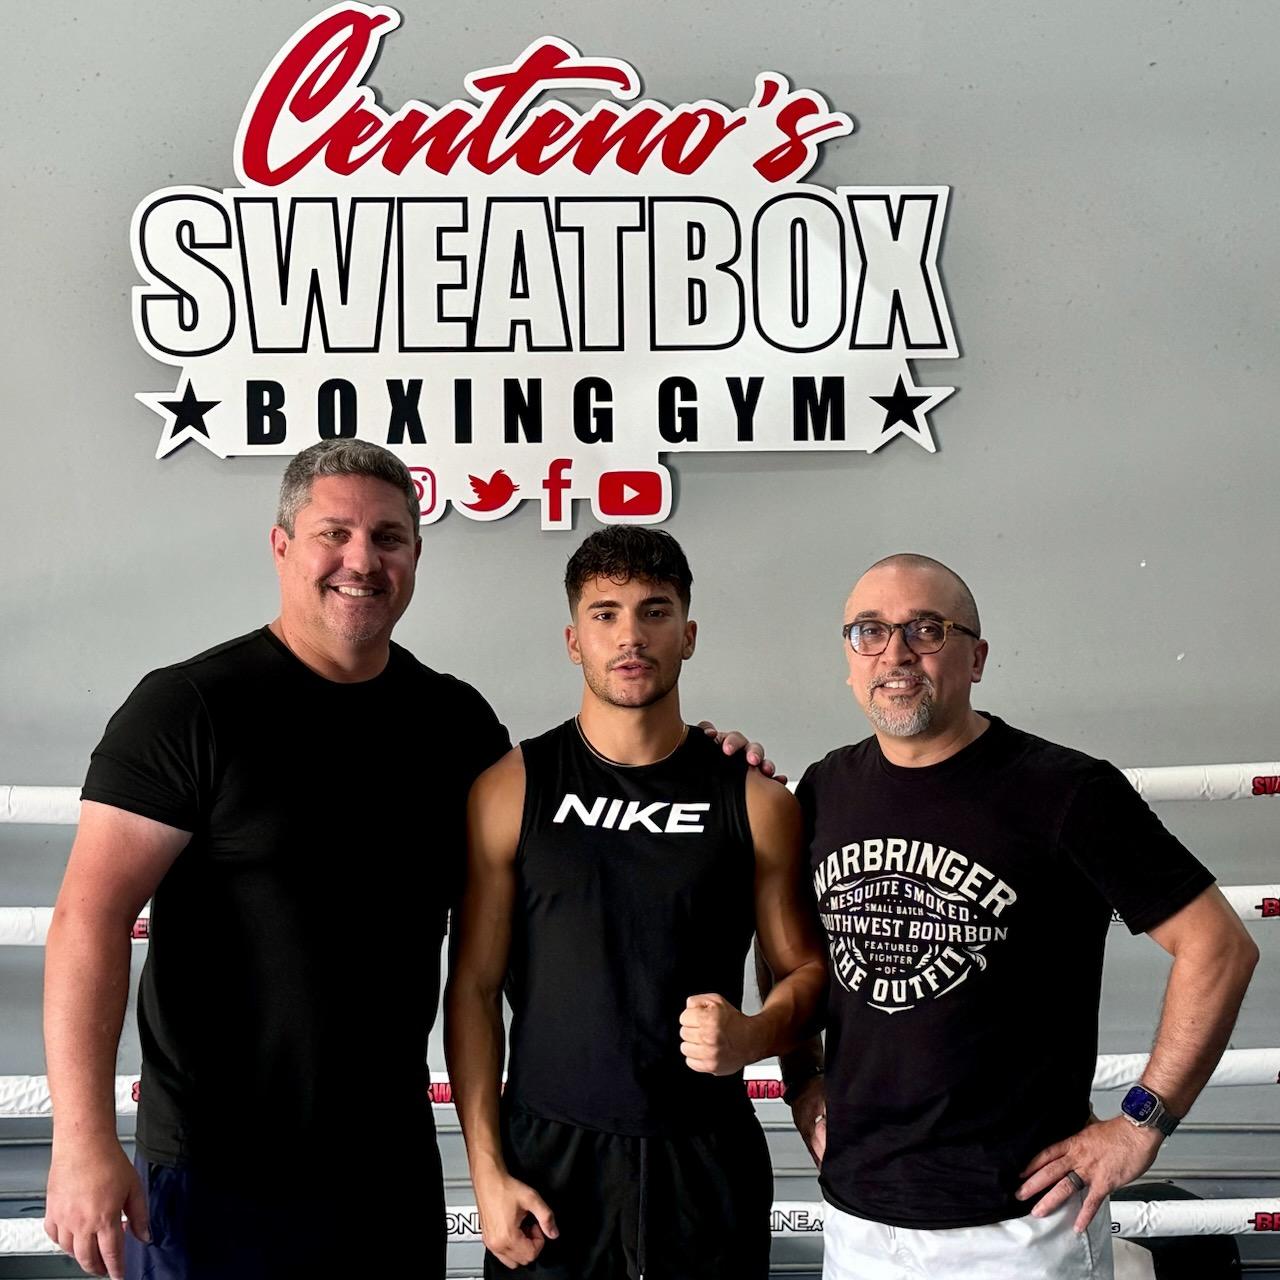 Italian flyweight Christian Chessa is looking to build a name in the U.S.